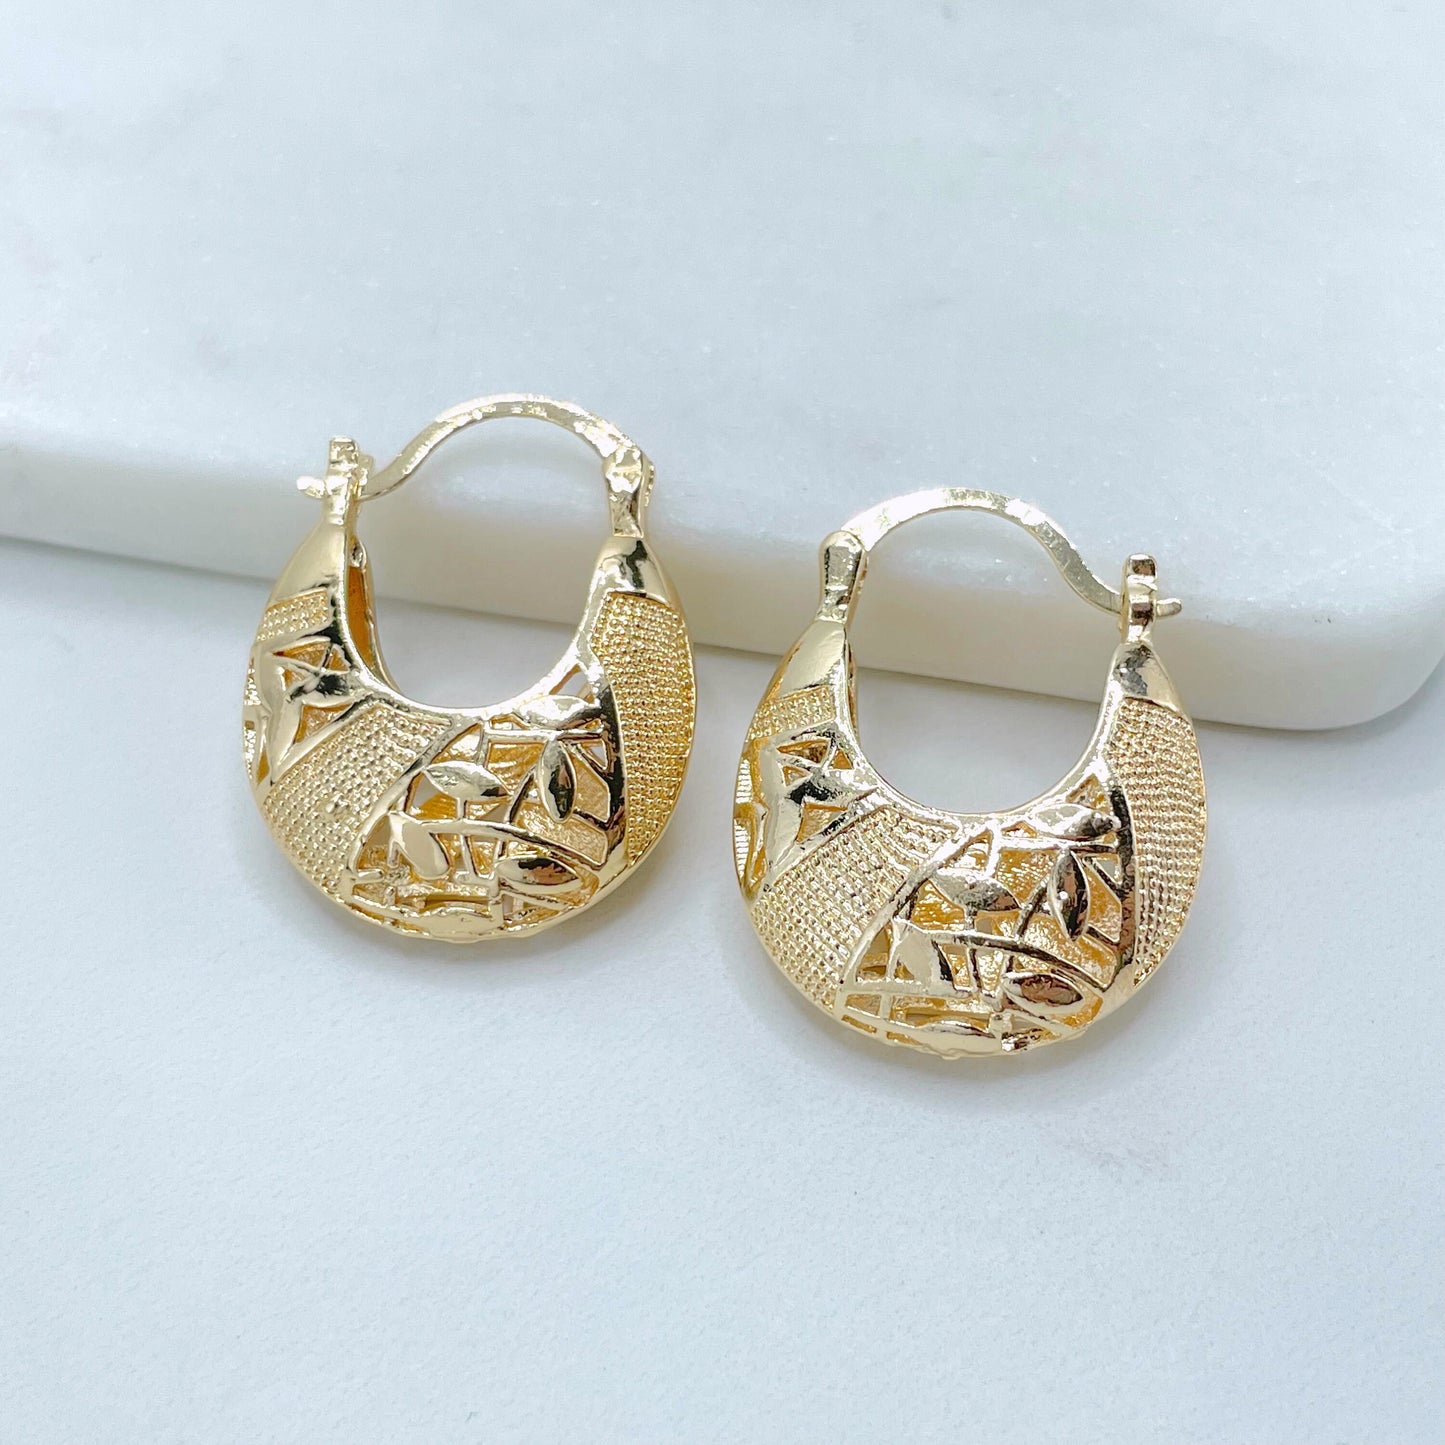 18k Gold Filled 24mm Filigree Basket Hoop Earrings, 11mm Thickness, Wholesale Jewelry Making Supplies